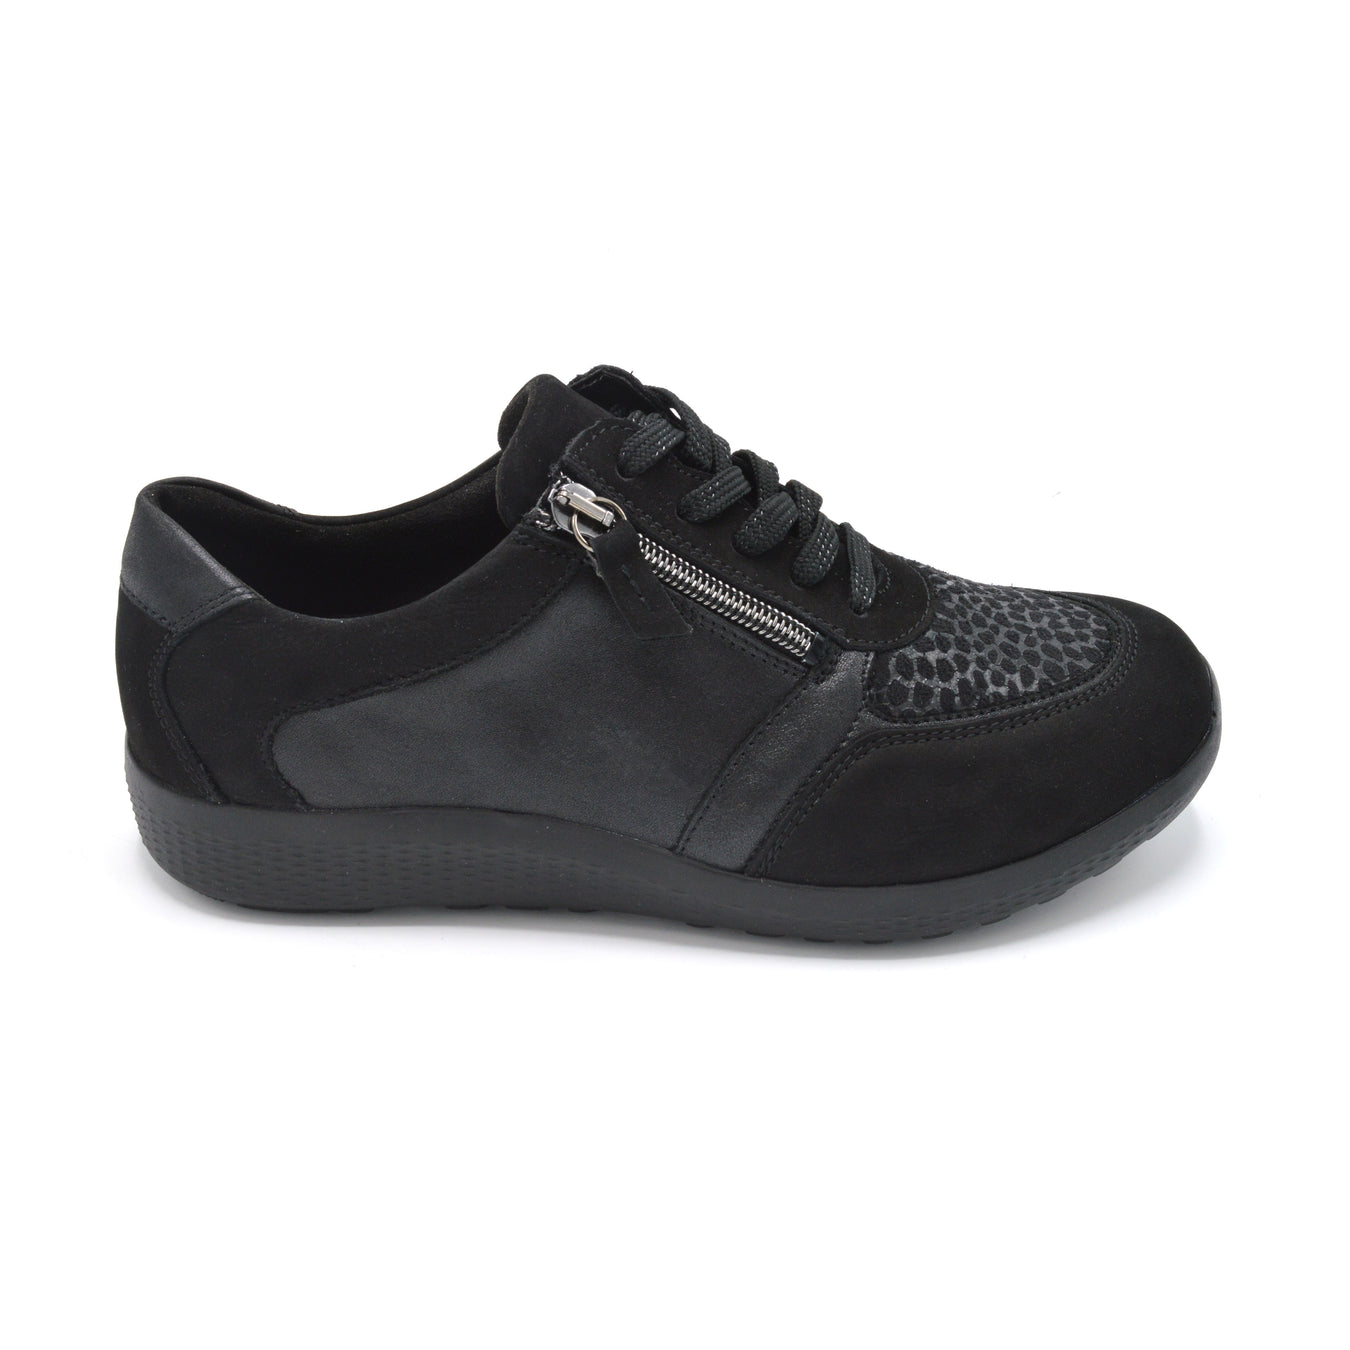 Ladies Wide Fit Shoes For Medium Bunions